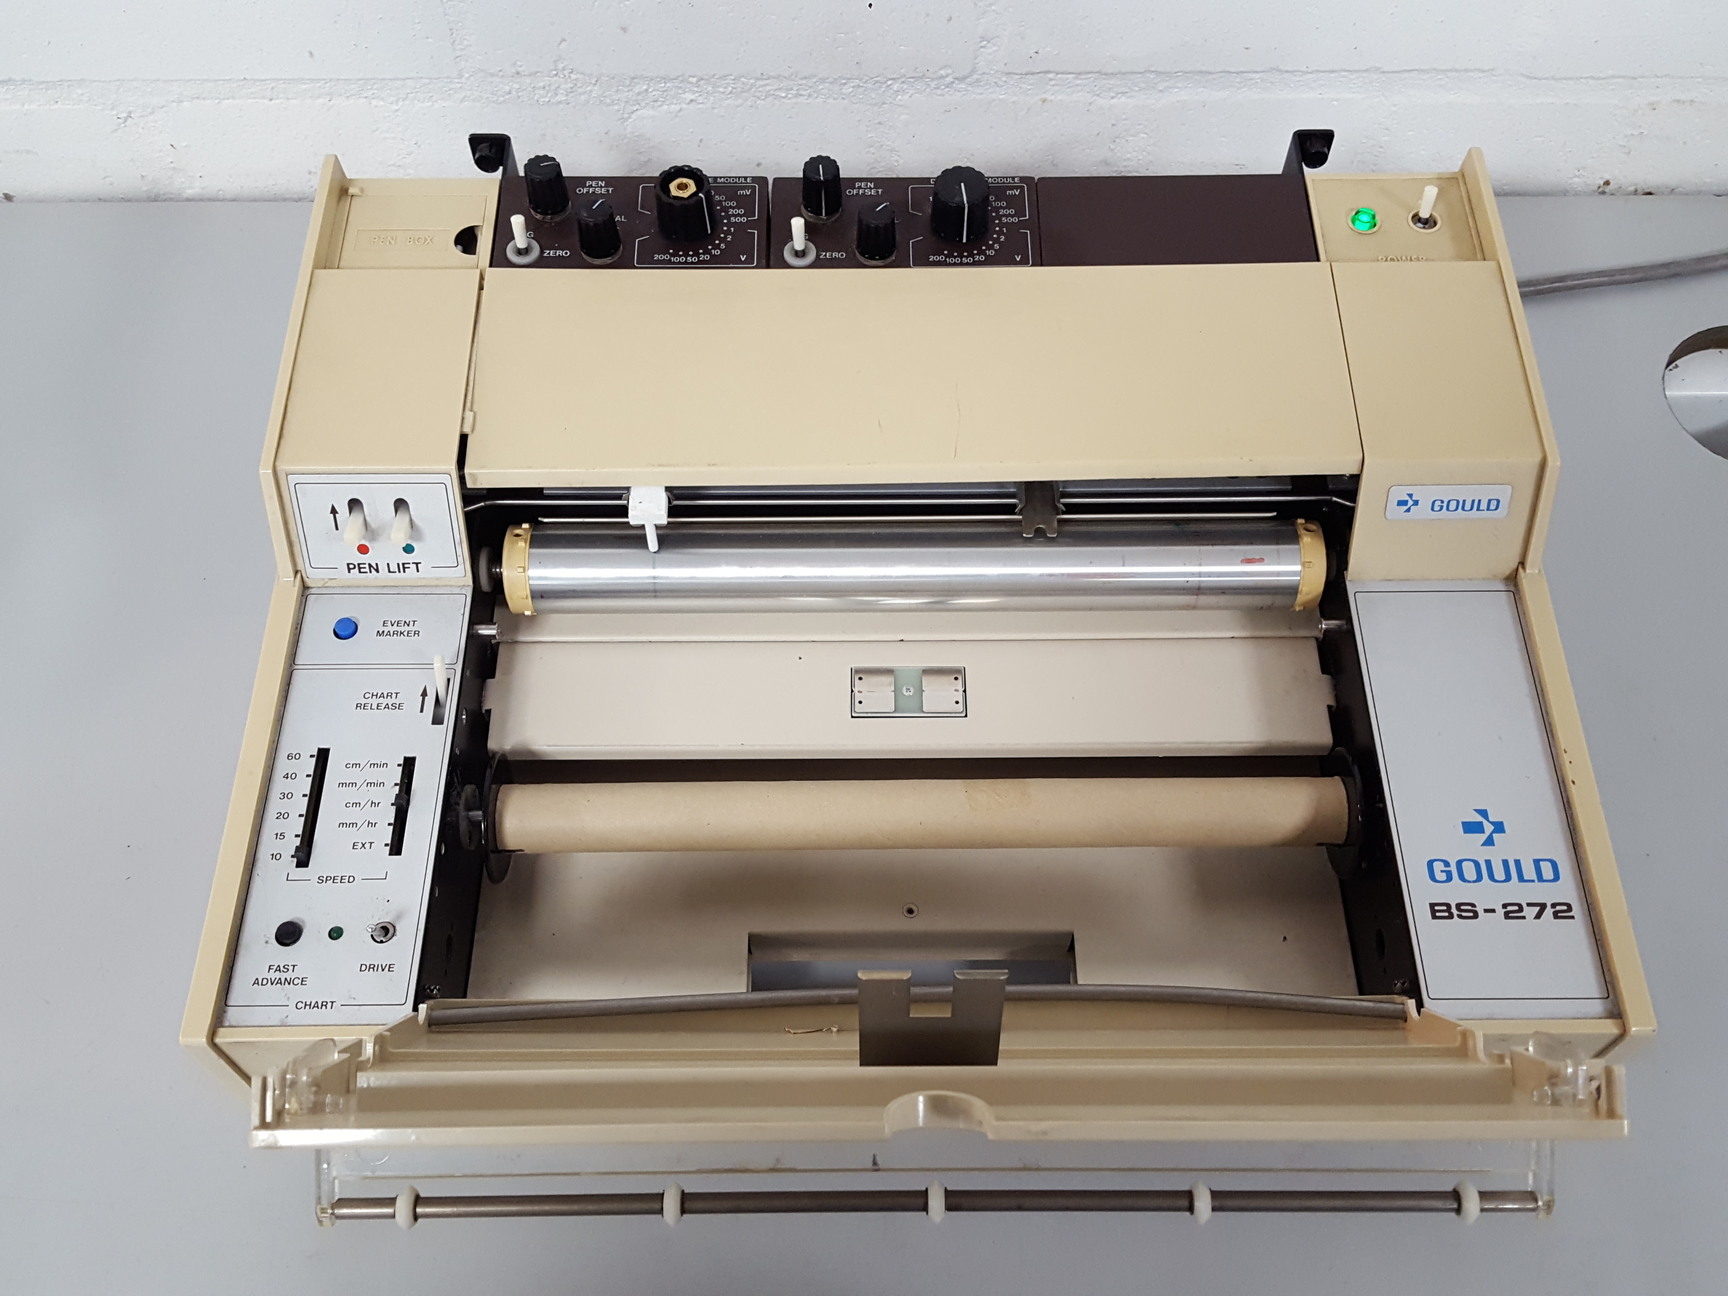 Gould Type BS272 Chart Recorder Lab